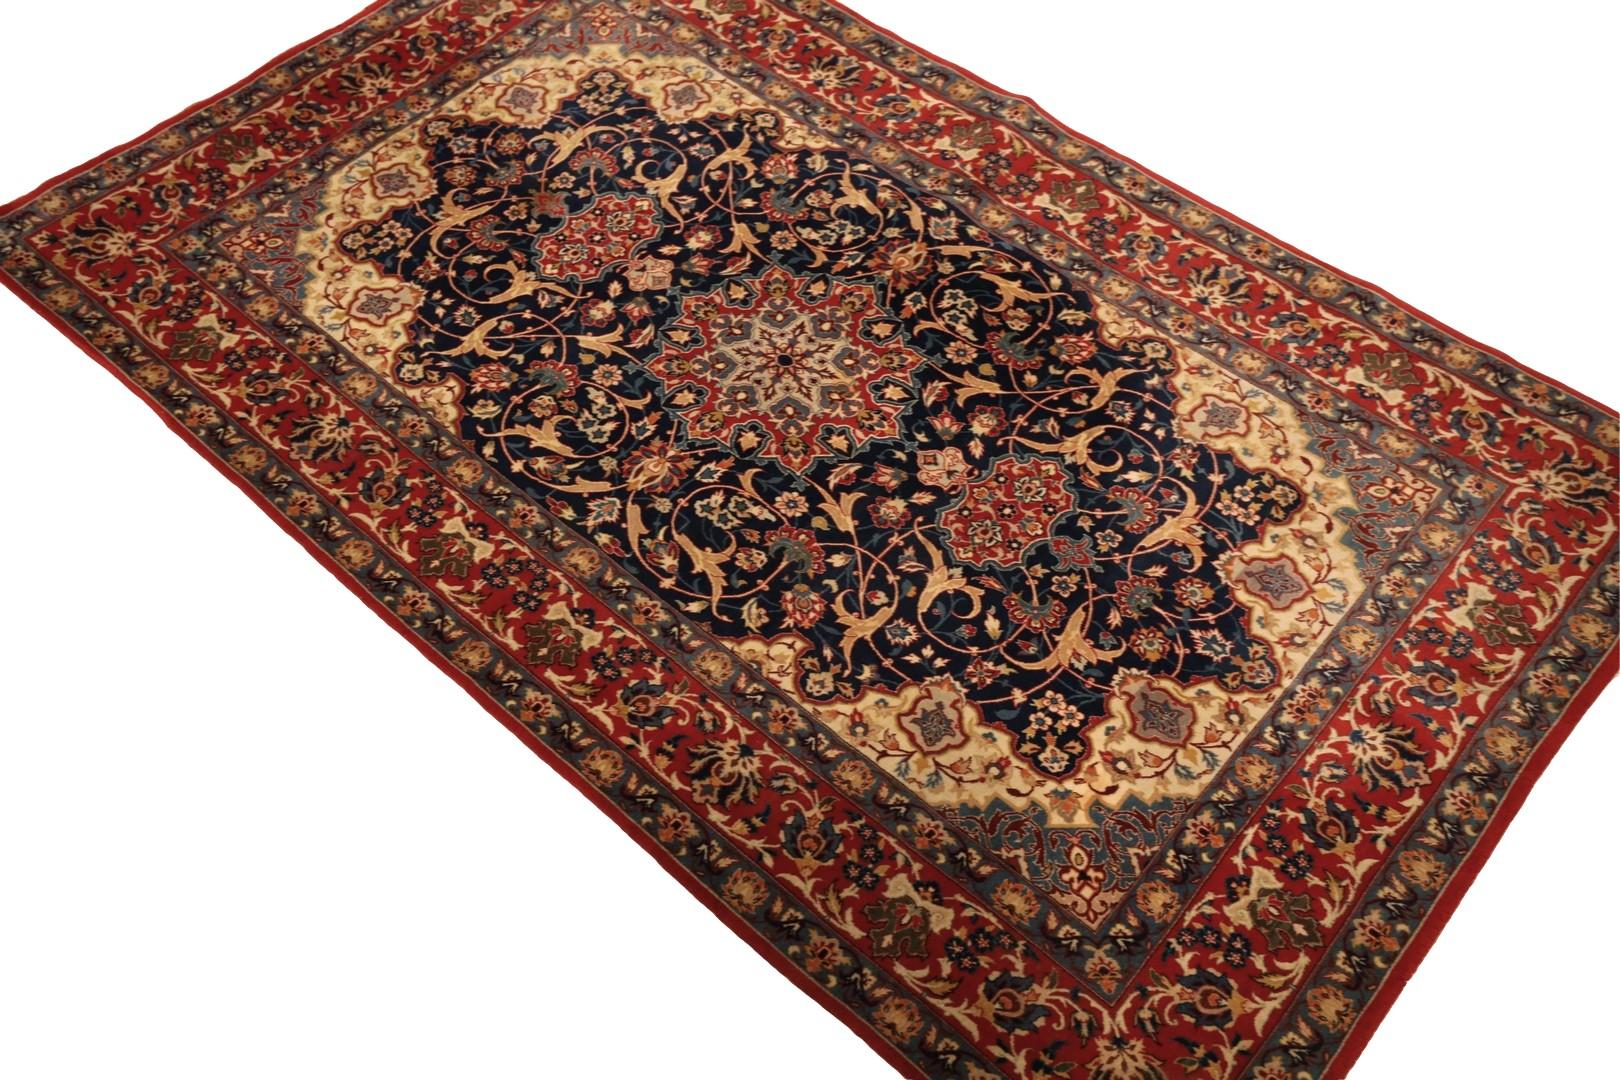 20th Century Isfahan Antique rug - 3'5